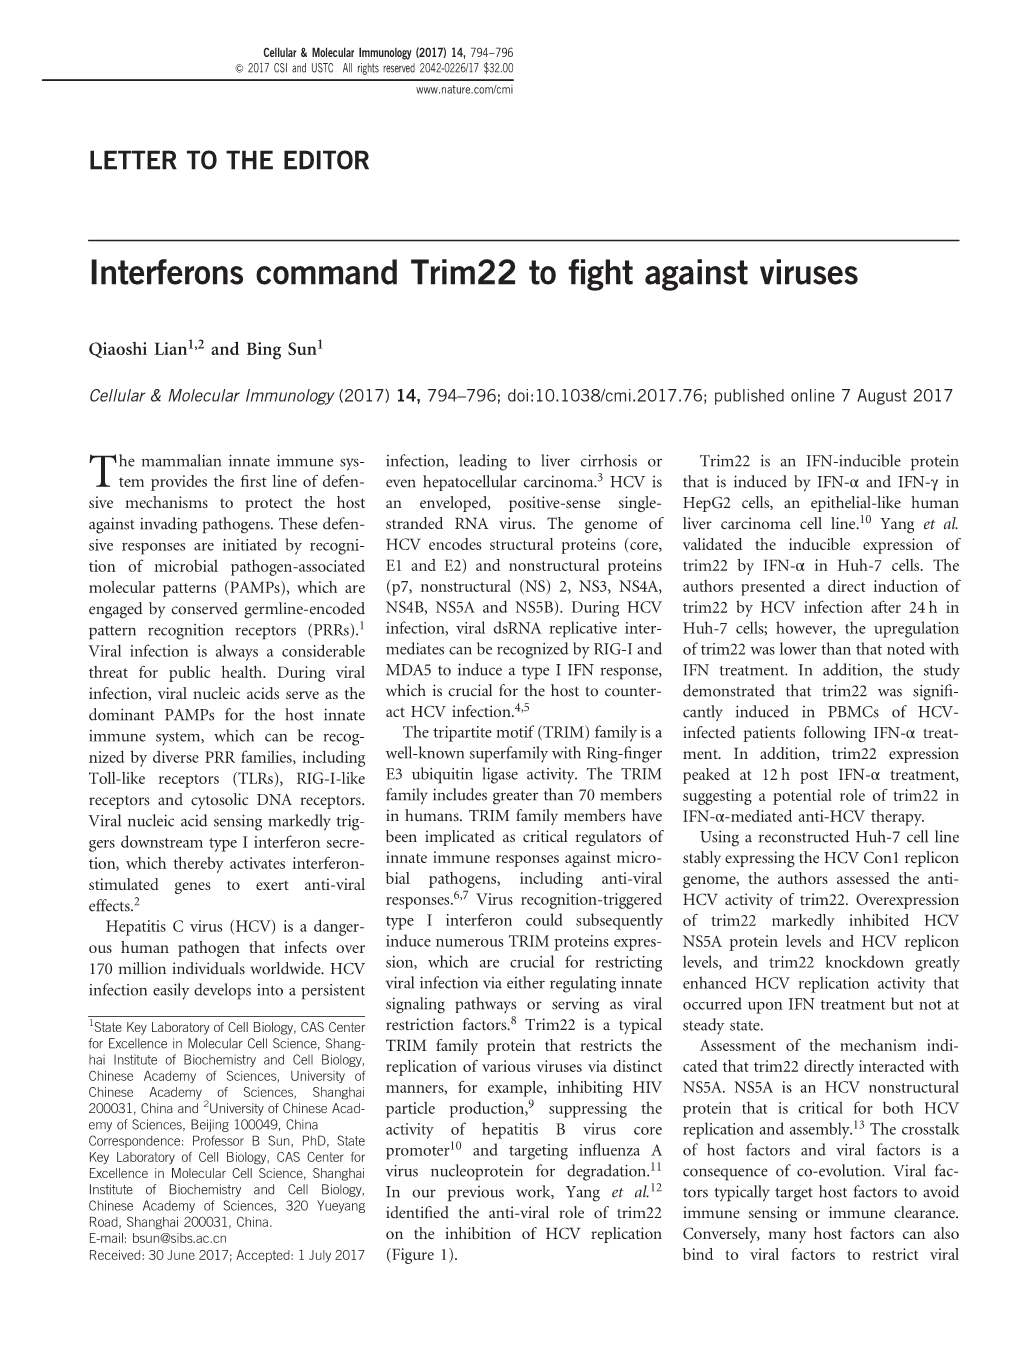 Interferons Command Trim22 to Fight Against Viruses